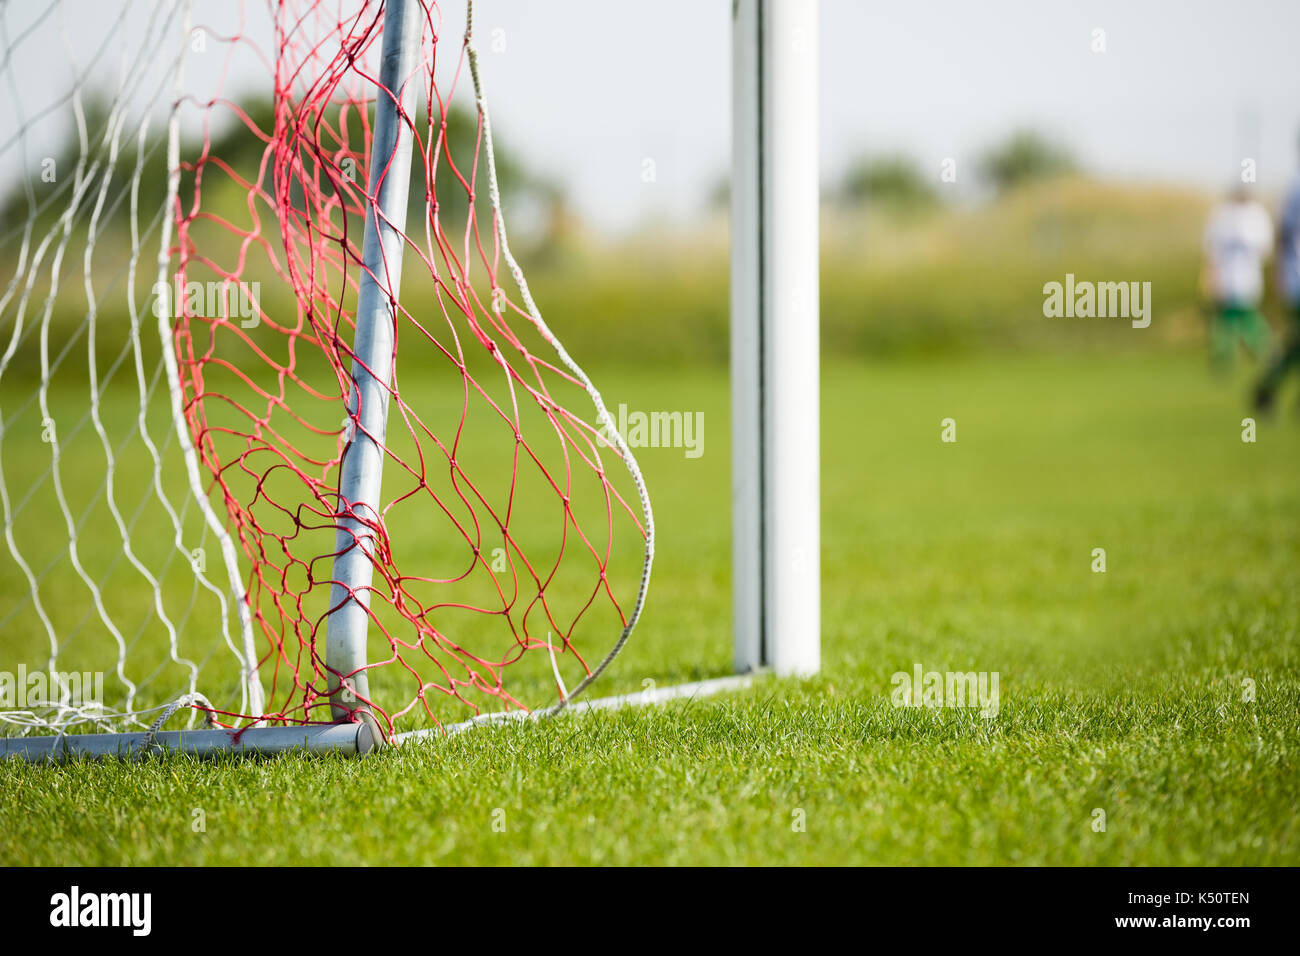 Football Goal Detail With A Soccer Players In The Background Stock Photo Alamy